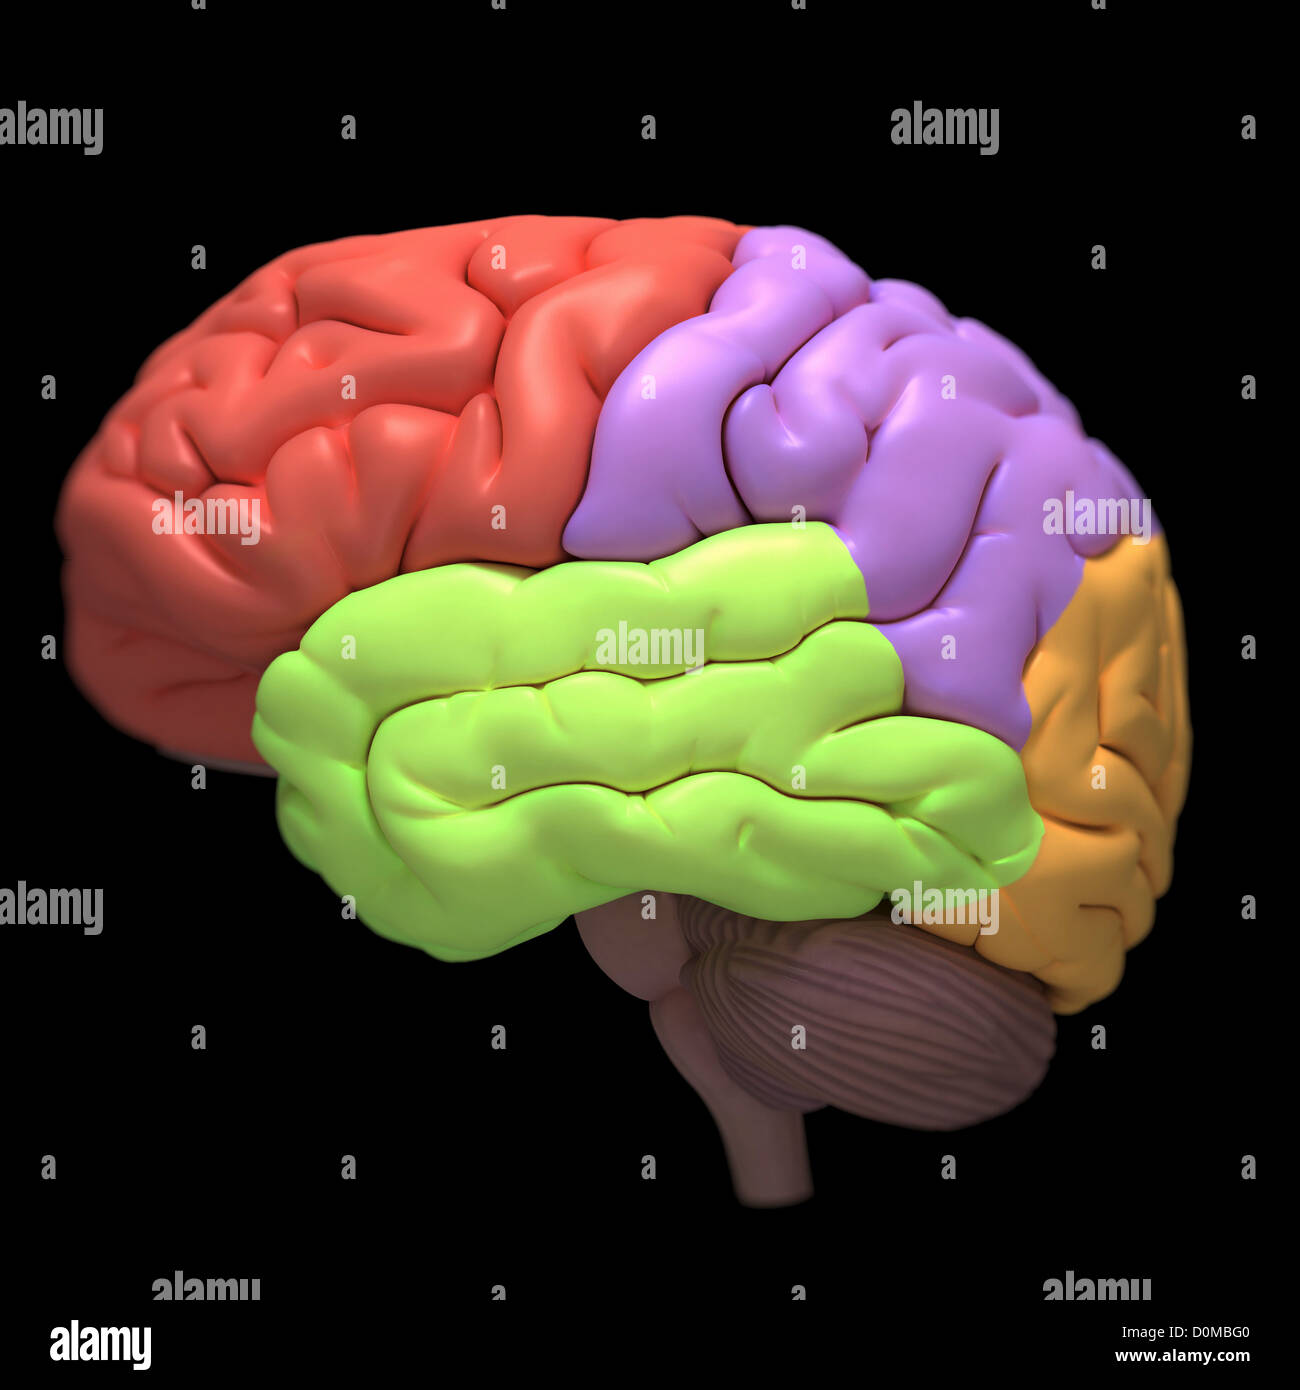 A model of the human brain, isolating different lobes with color. Stock Photo